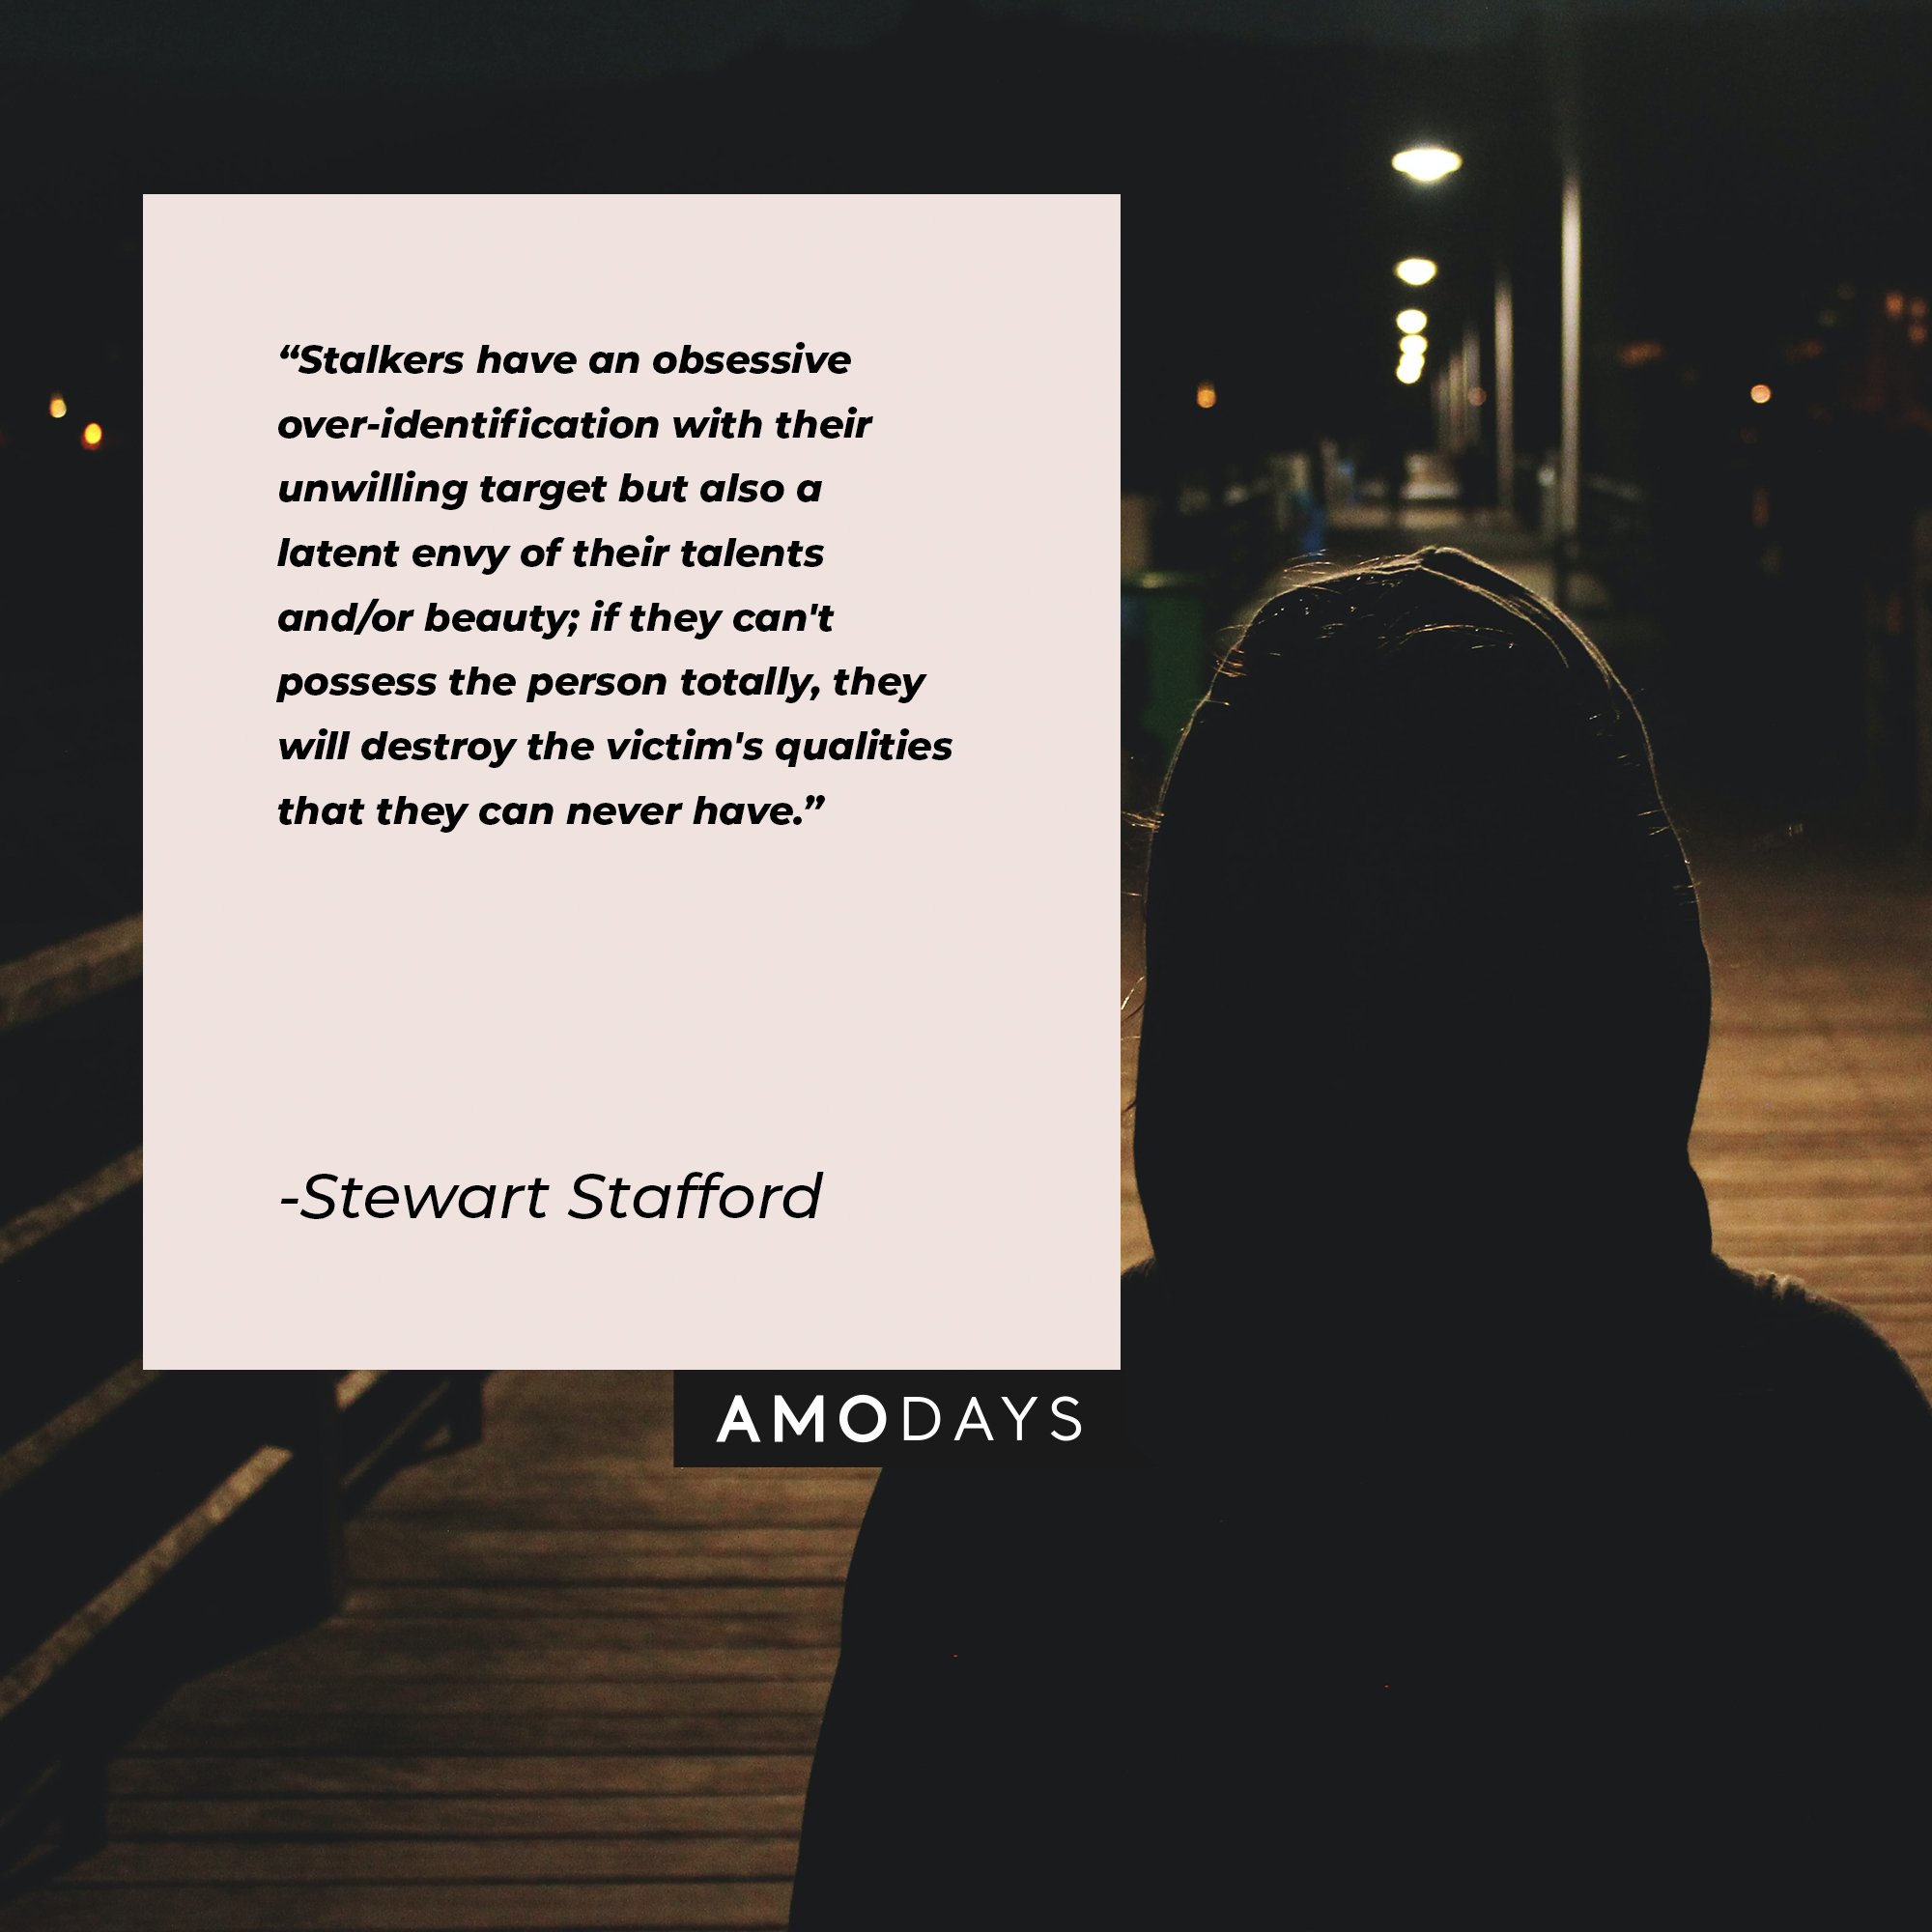 Stewart Stafford’s quote: "Stalkers have an obsessive over-identification with their unwilling target but also a latent envy of their talents and/or beauty; if they can't possess the person totally, they will destroy the victim's qualities that they can never have." | Image: AmoDays